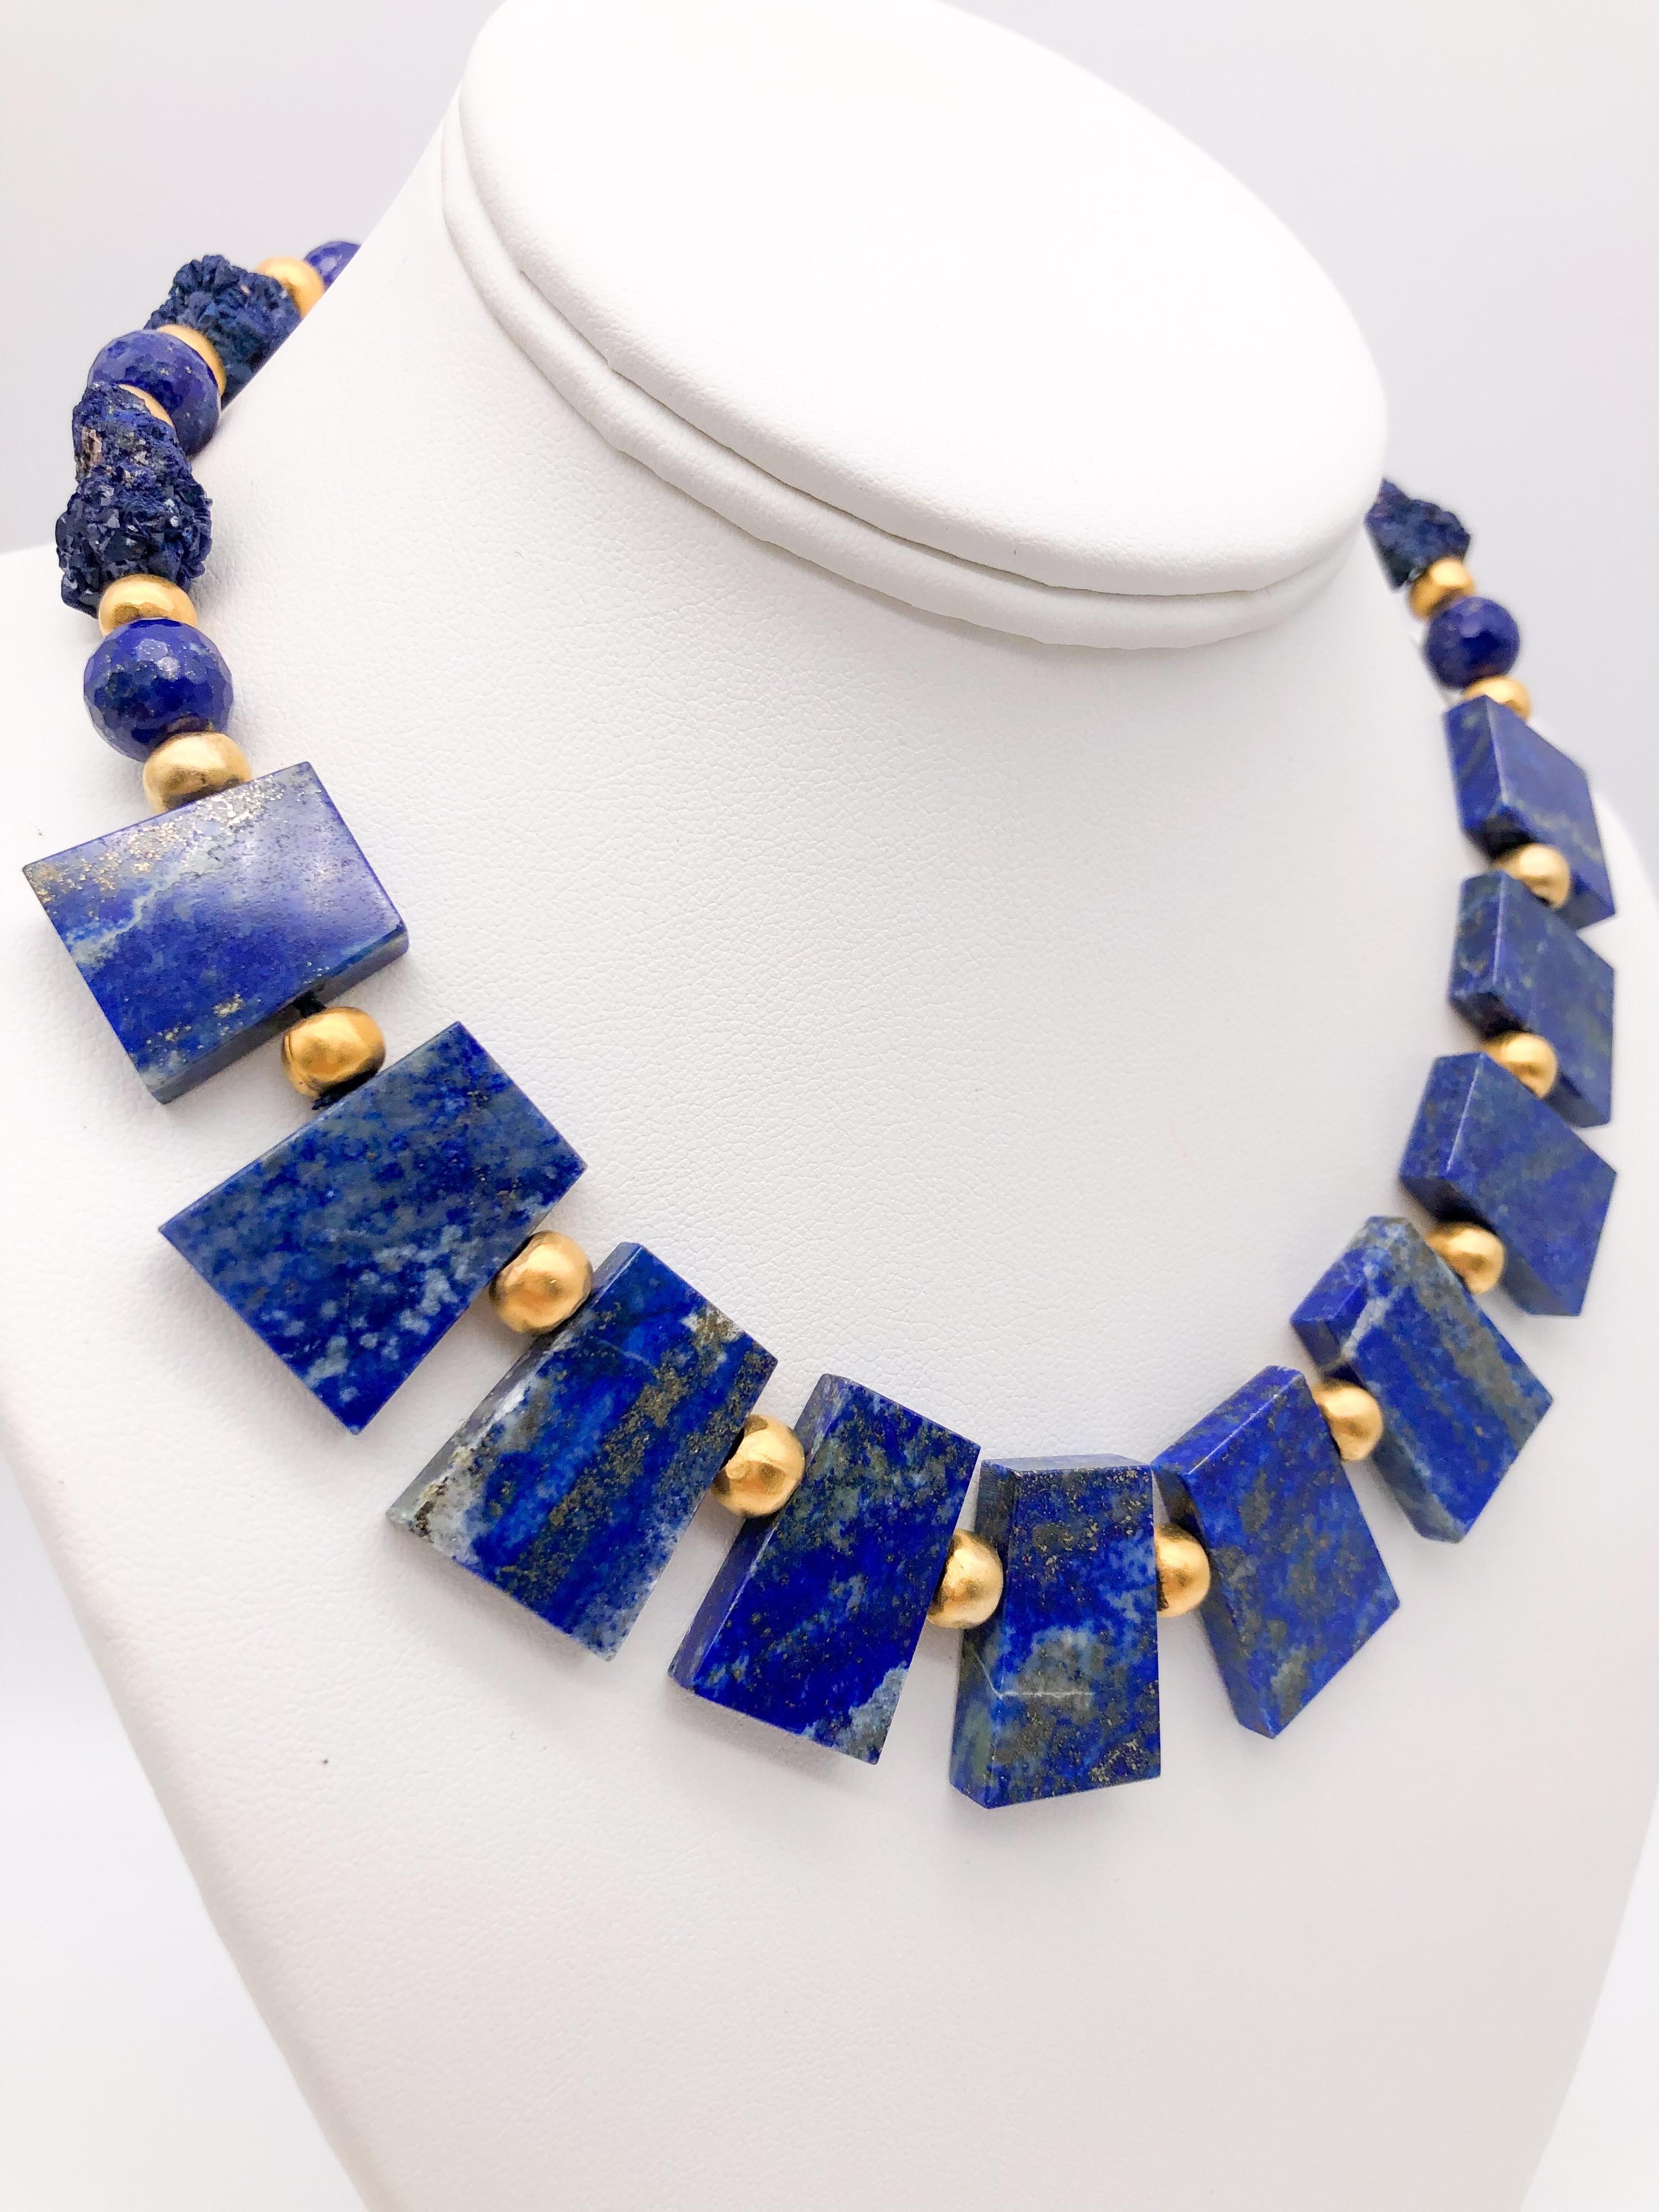 One-of-a-Kind

A collar of fine blue polished Lapis Lazuli shot through with gold is suspended from a strand of hammered azurite and Lapis beads, the clasp is a polished Lapis vermeil box, mankind. Cleopatra was one of the earliest collectors of